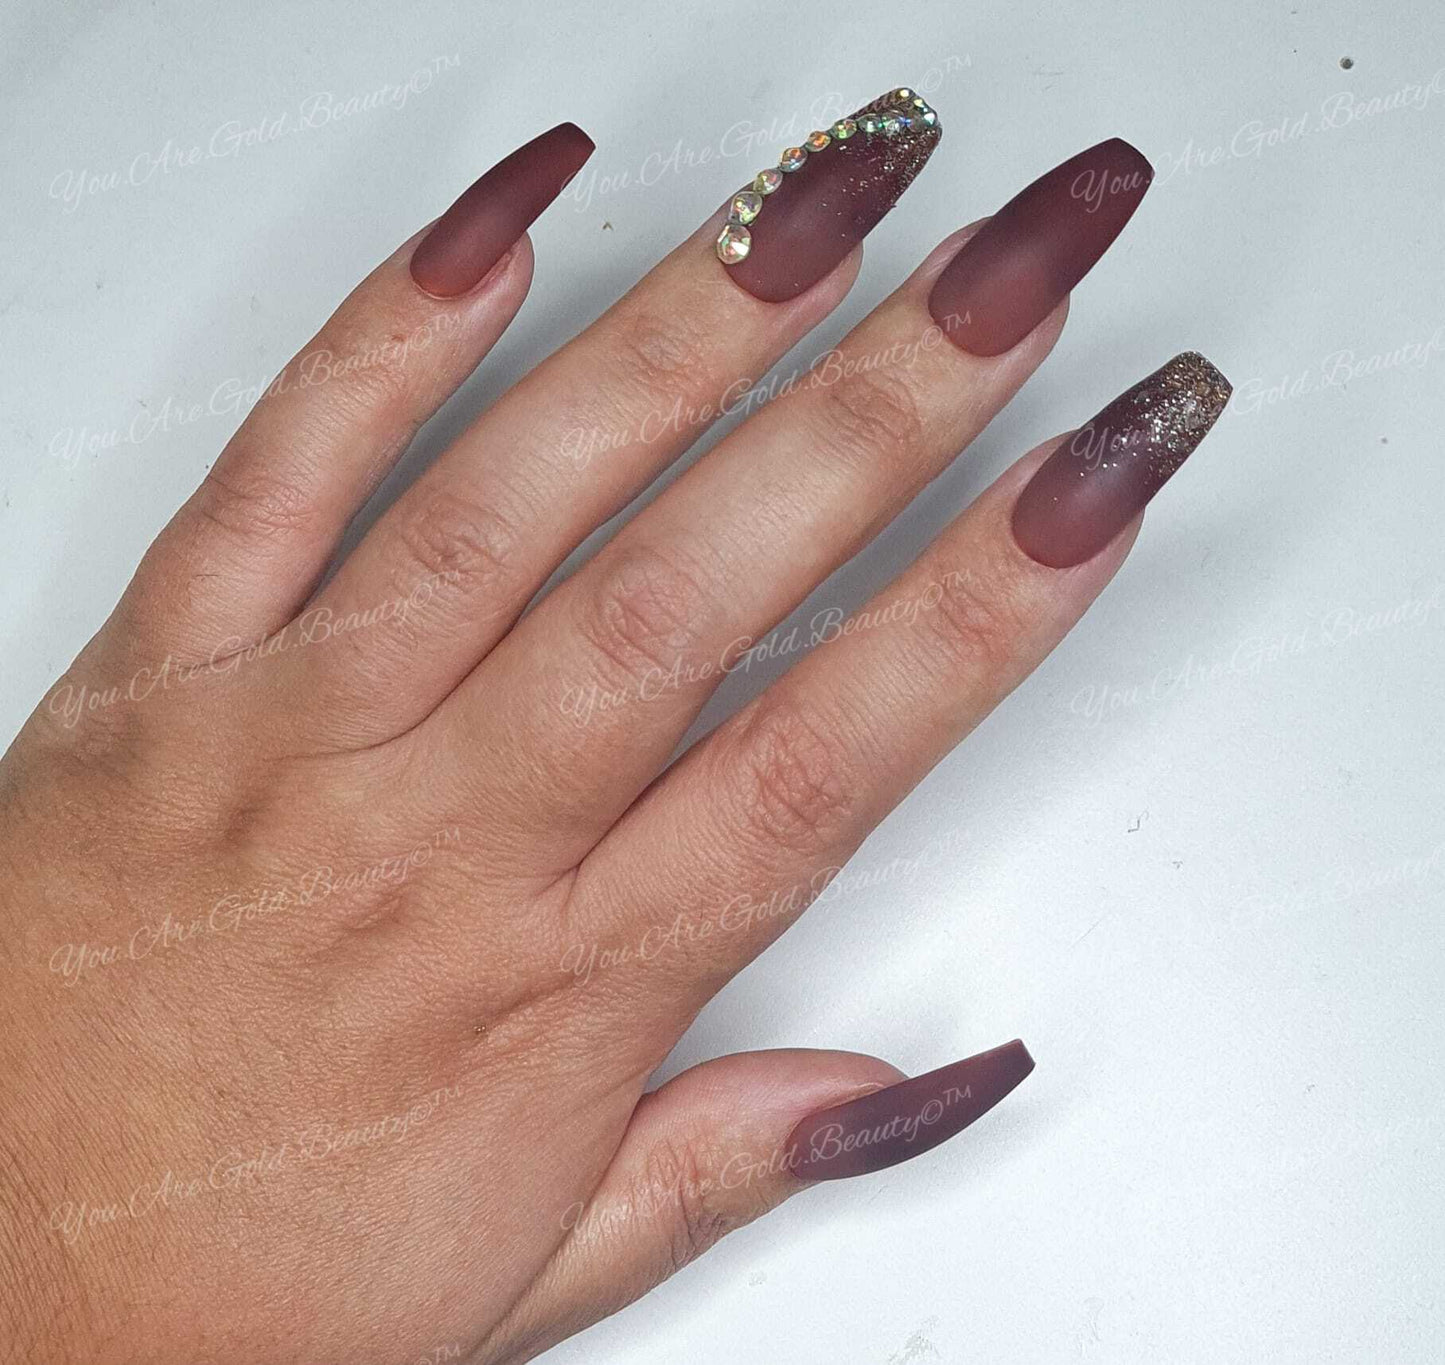 Thermal Colour Changing Coffin Shaped Matte Chocolate Brown Press On Nails with Gold Glitter and Rhinestone Diamante. matte brown nails press on nails uk coffin shaped nails coffin nails chocolate nails press on nails uk thermal colour changing nails 